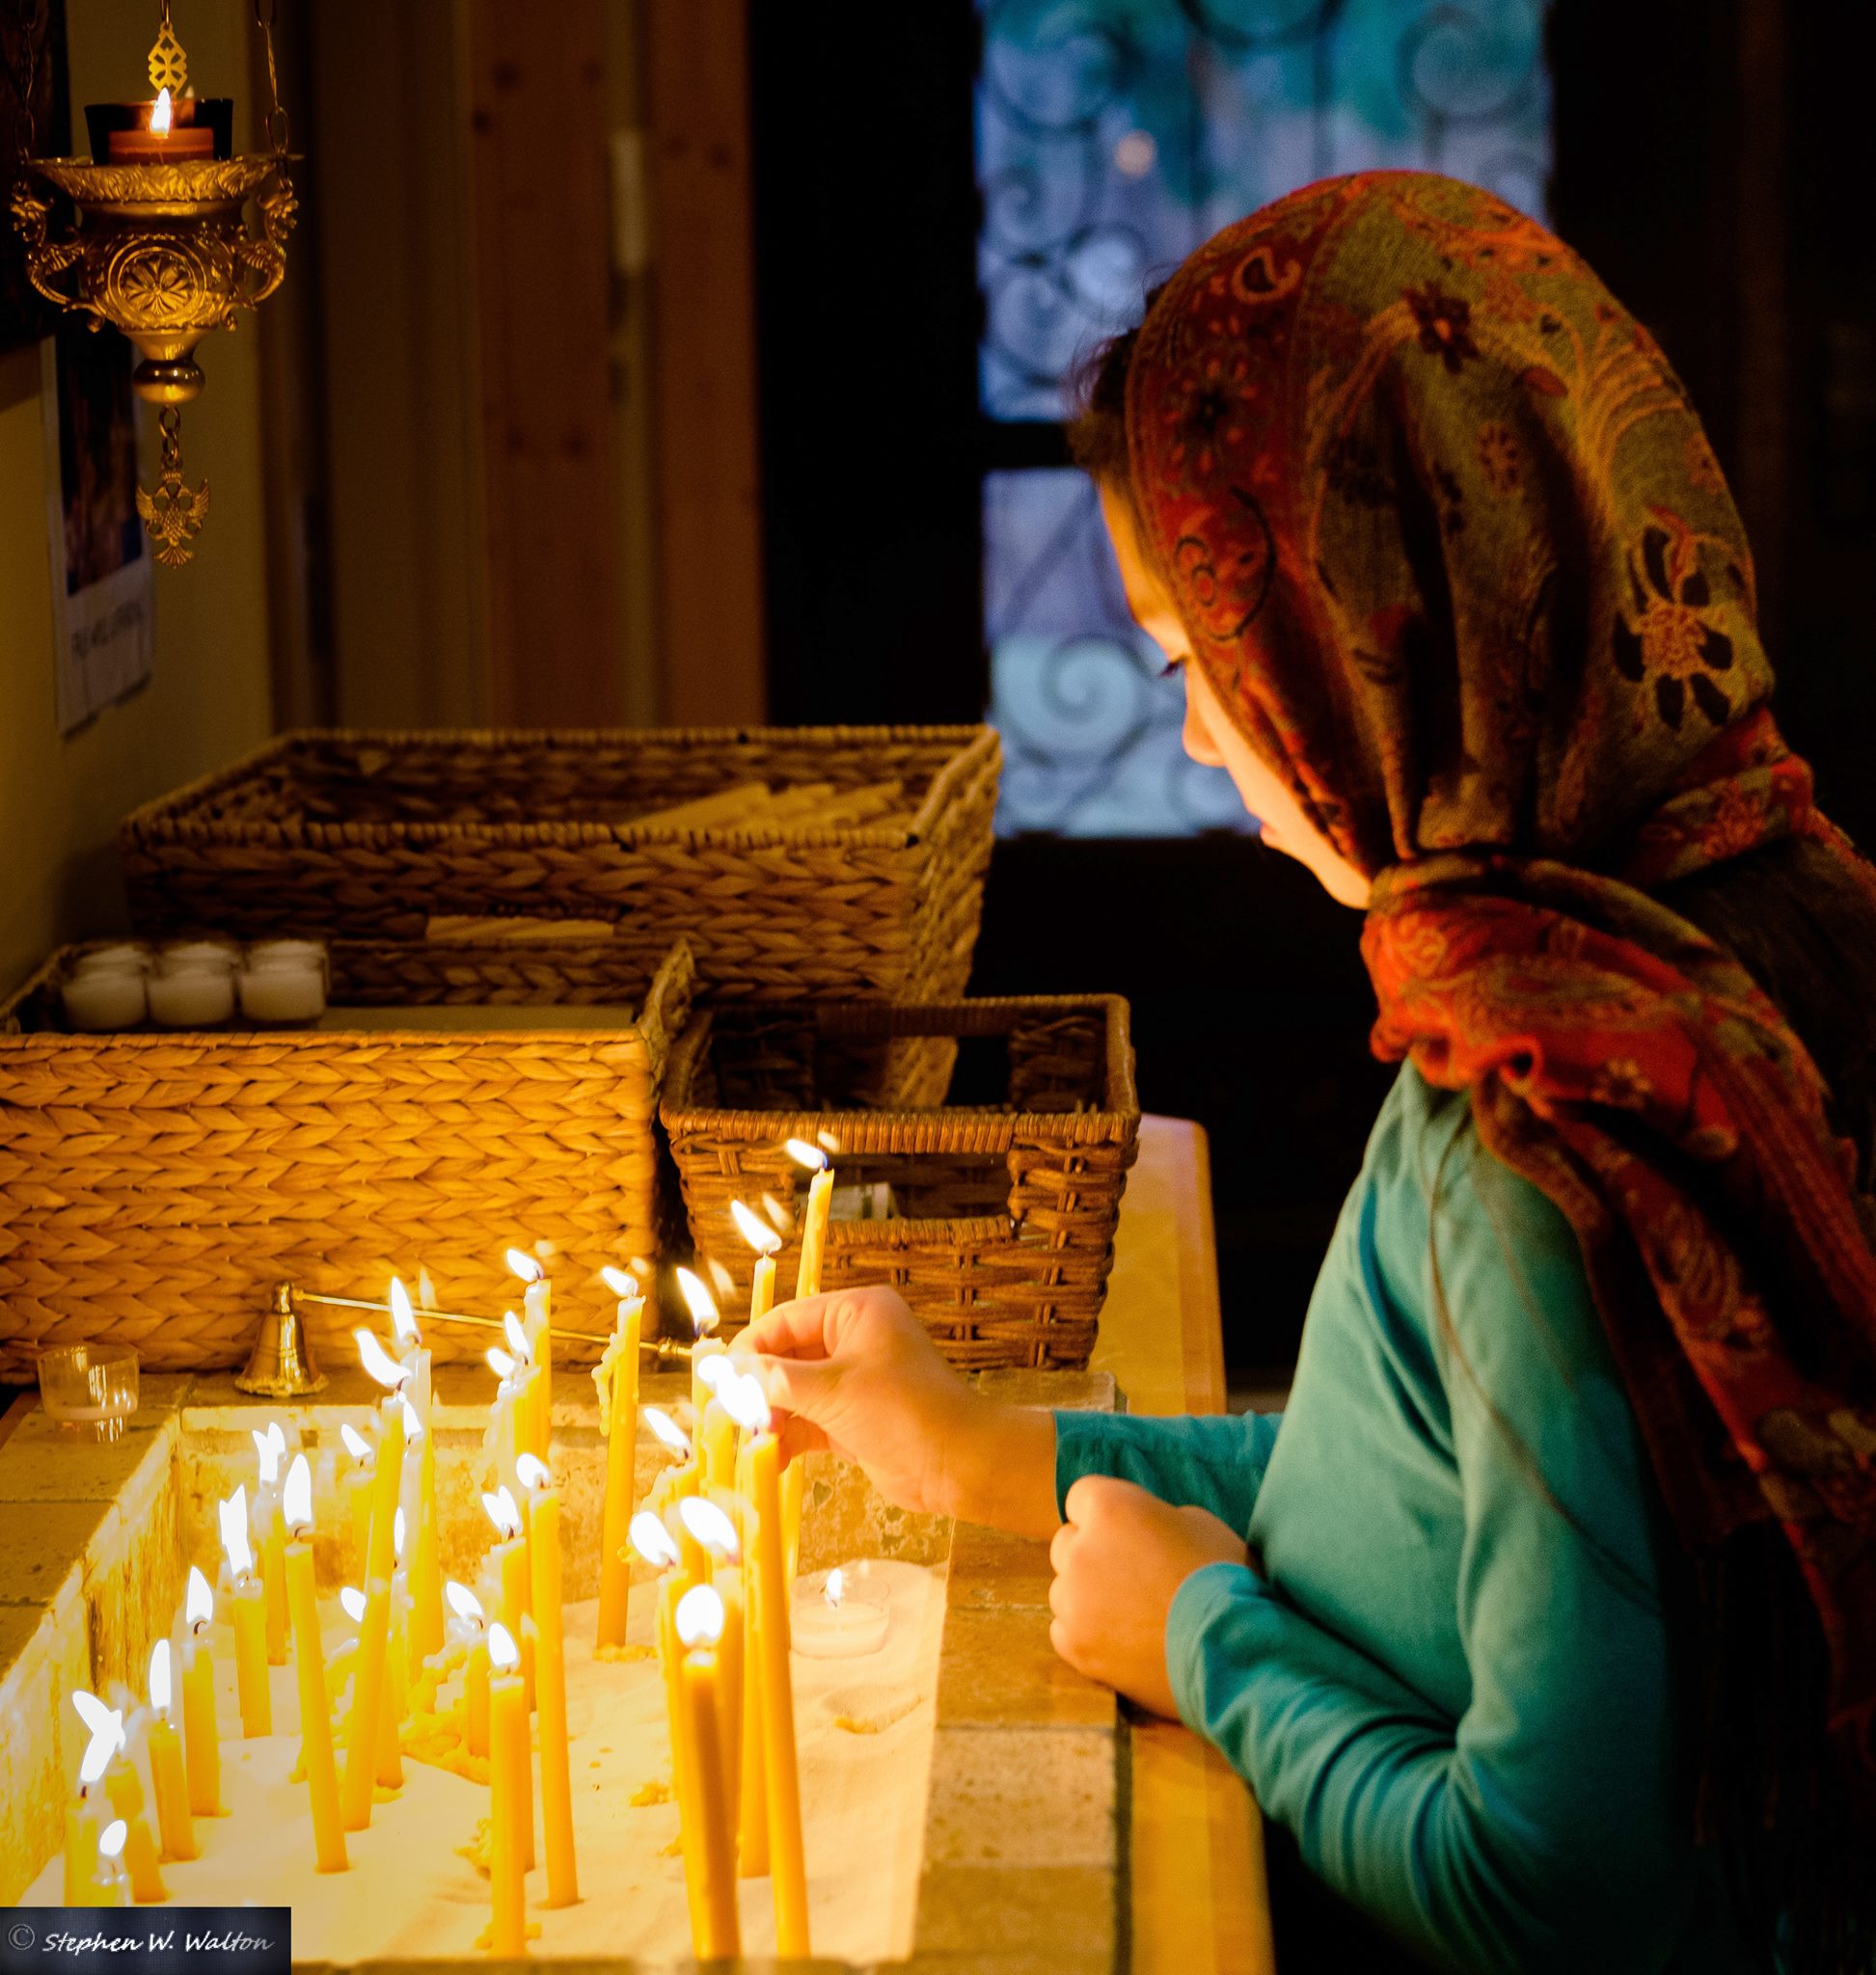  young girl in front of the candle stand 